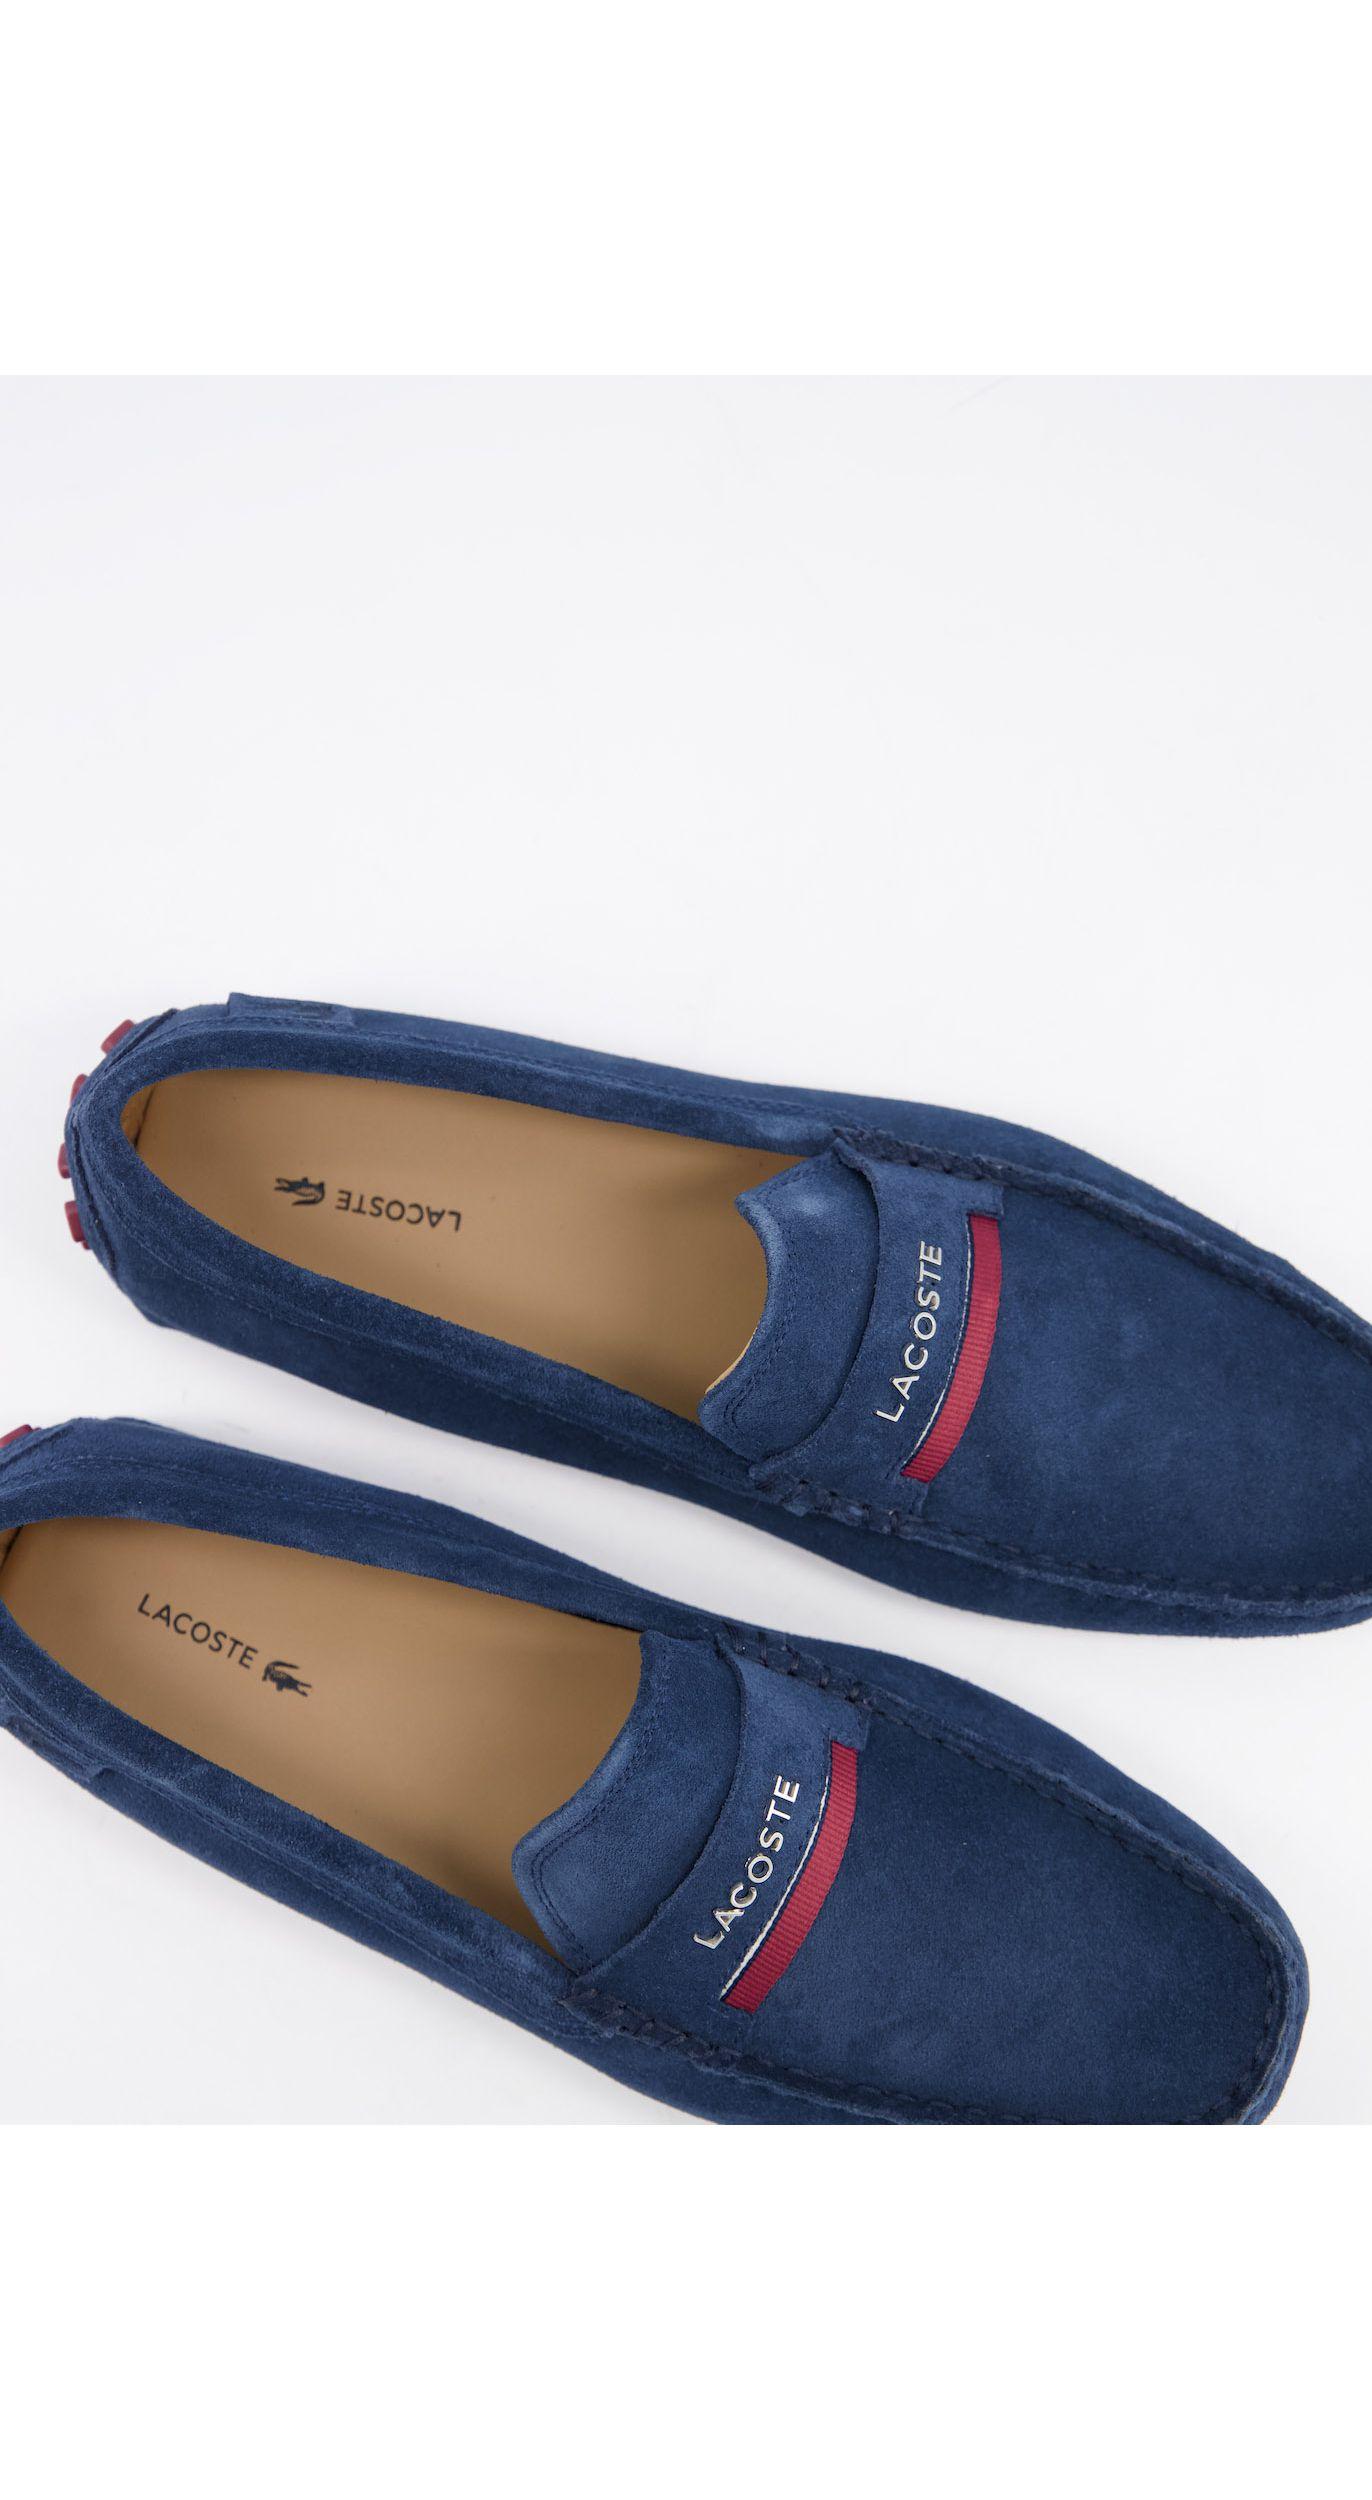 Lacoste Concours Tassle 7 Moccasin Driver Loafer Shoe - Navy - Mens